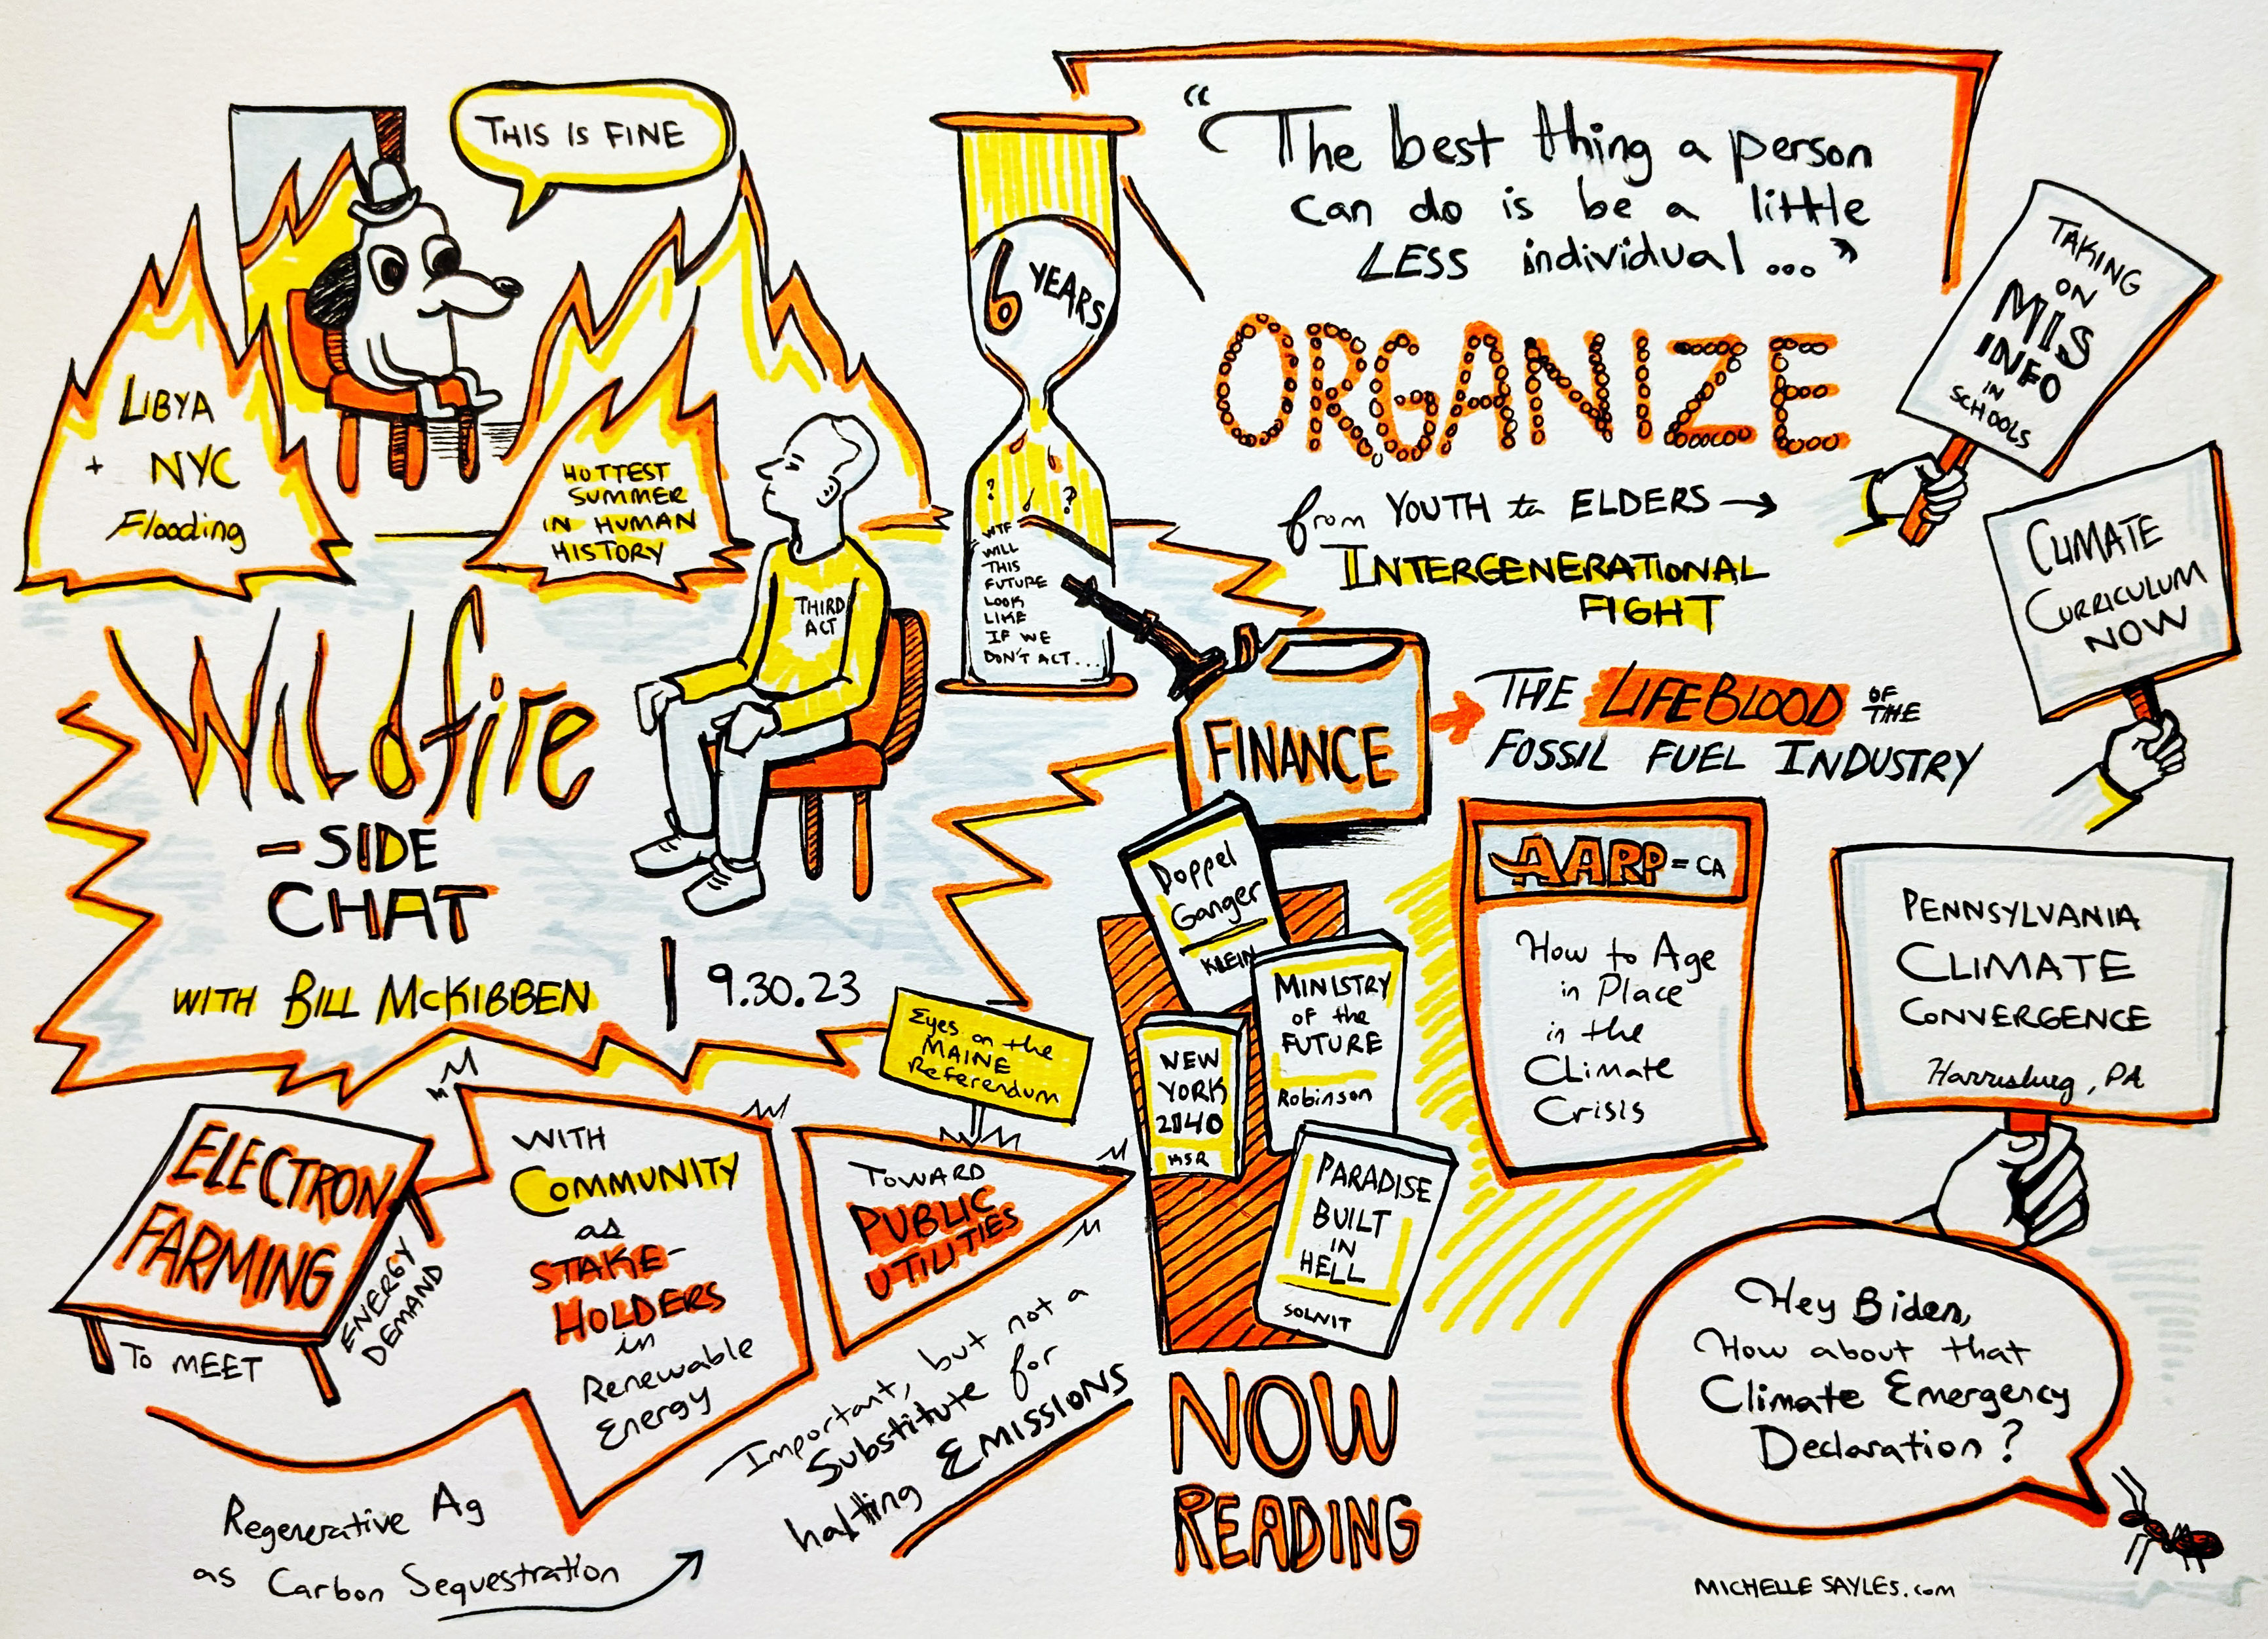 Sketchnotes from the PA Climate Convergence event: A Wildfire-Side Chat with Bill McKibben. Shows a meme of a dog sitting on a chair in a room on fire, saying "This is fine". The fires are labeled: "Libya and NYC Flooding" and "The hottest summer in human history." Bill McKibben looks on wearing a Third Act shirt. Quote: "The best thing a person can do is be a little less individual..." Organize: from youth to elders, intergenerational fight. Finance is the lifeblood of the fossil fuel industry. Electron farming through solar to meet energy demand. With community as stakeholders in renewable energy. Moving toward public utilities (eyes on the Maine referendum). Regenerative ag as carbon sequestration - important, but not a substitute for halting emissions. Now reading: Doppelganger by Naomi Klein, Ministry of the Future and New York 2140 by Robinson, and Paradise Built in Hell by Solnit. Hey Biden, how about that Climate Emergency Declaration?